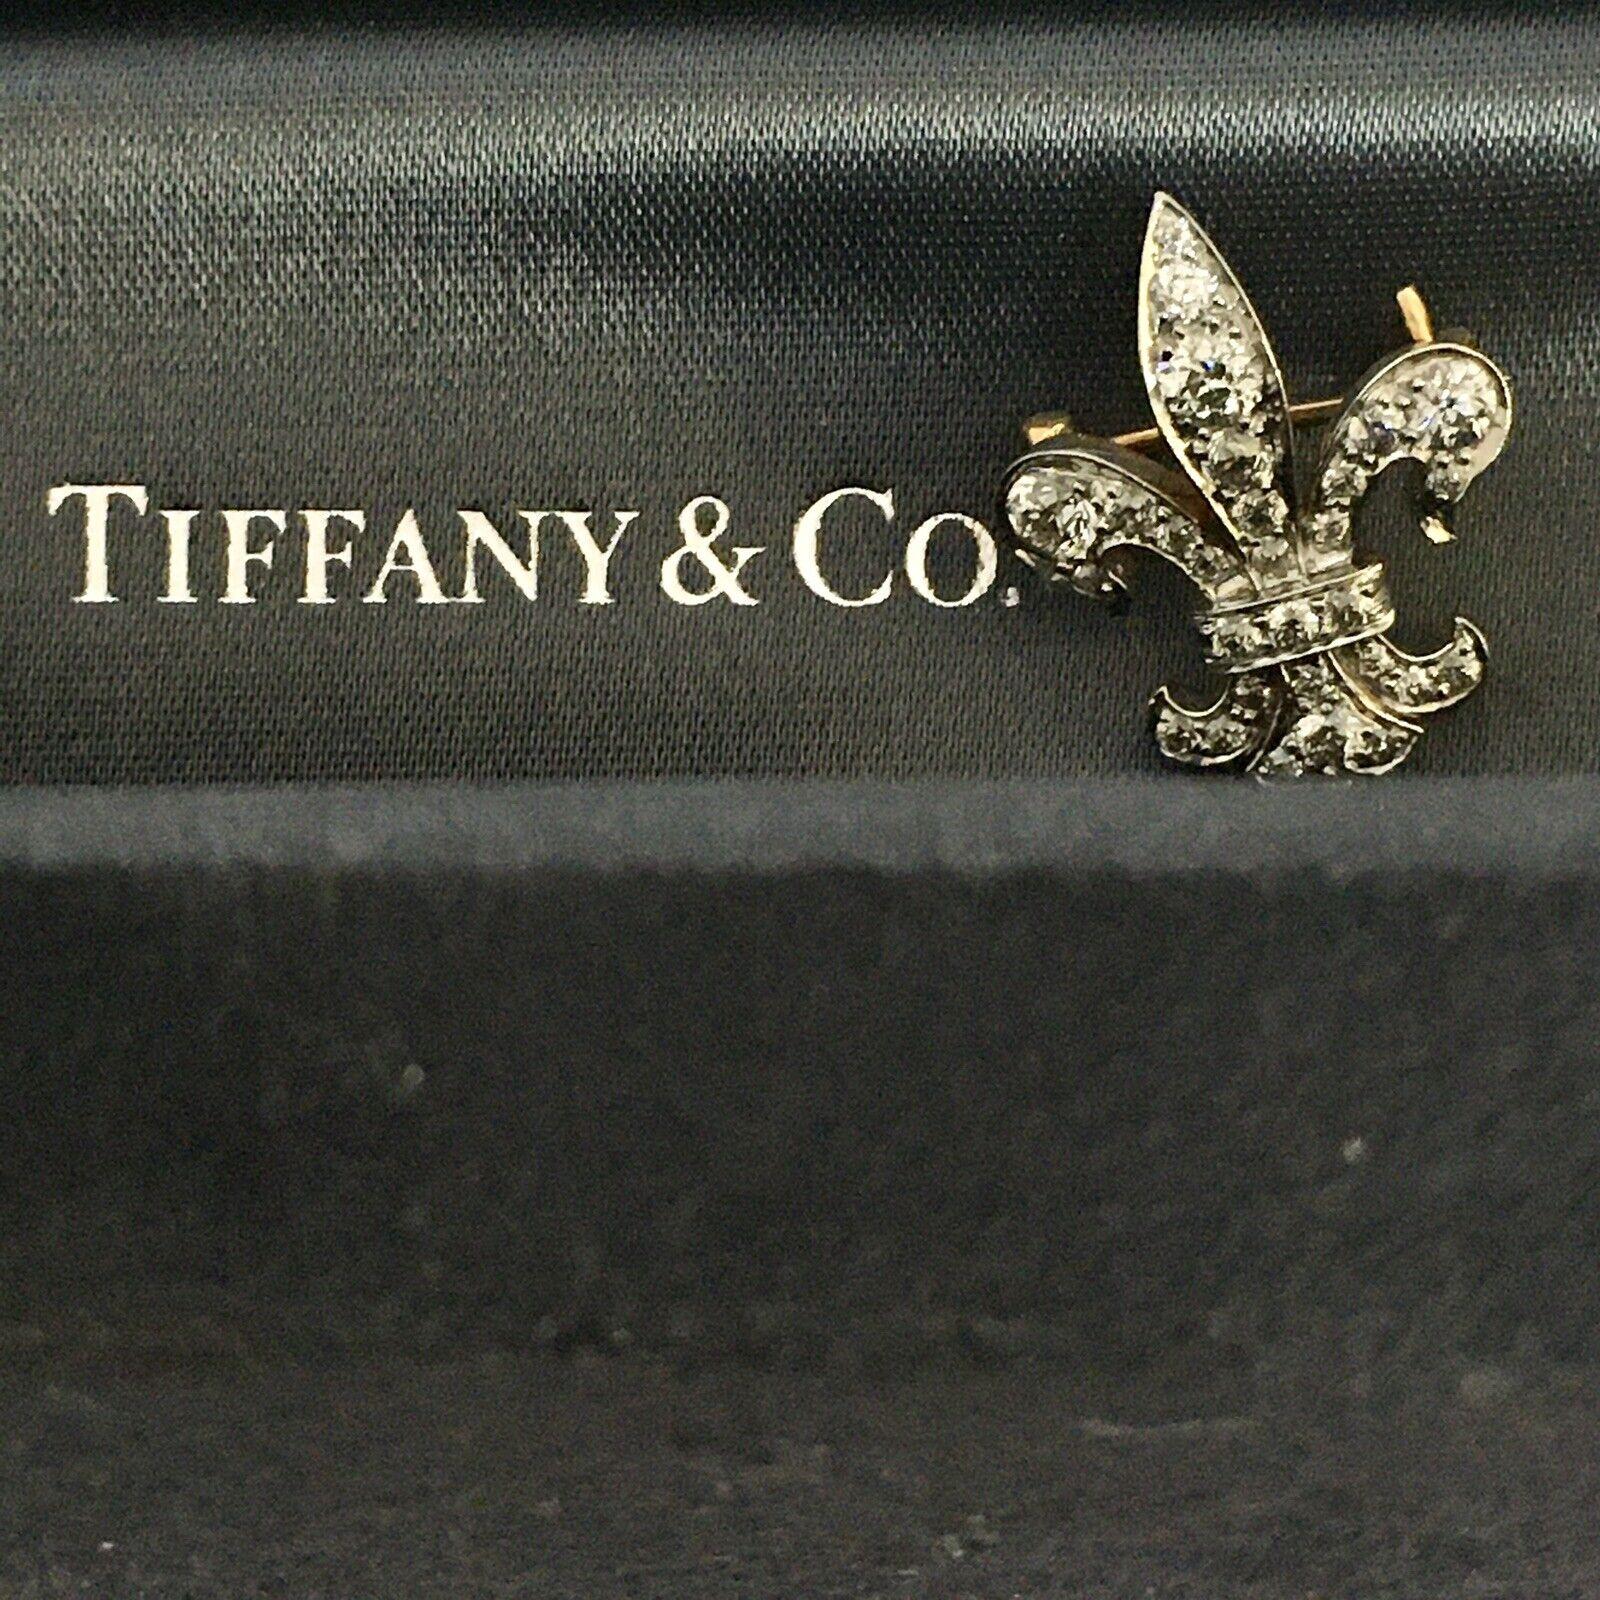 An antique, Edwardian/late Victorian era, Fleur-de-Lis brooch marked Tiffany & Co, set with Old European Cut Diamonds weighing approximately O.75- 1.00 total Carat weight, the largest Diamond weighing approximately 0.20 Carat, mounted on Platinum